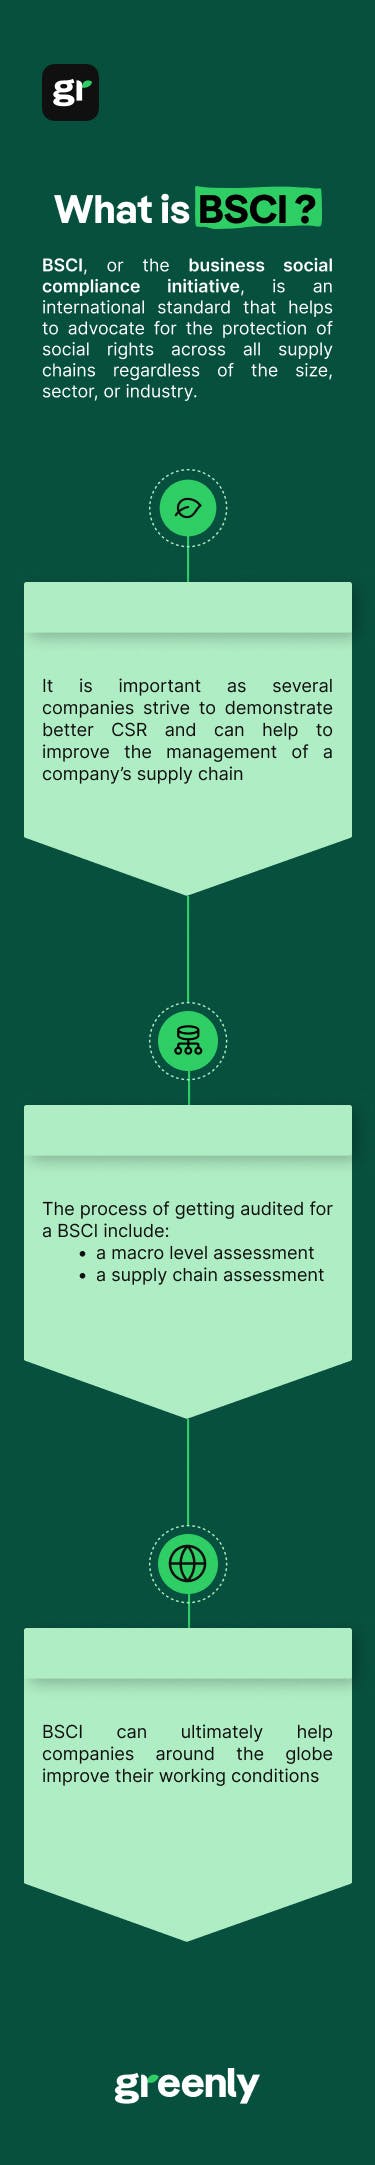 bsci infographic